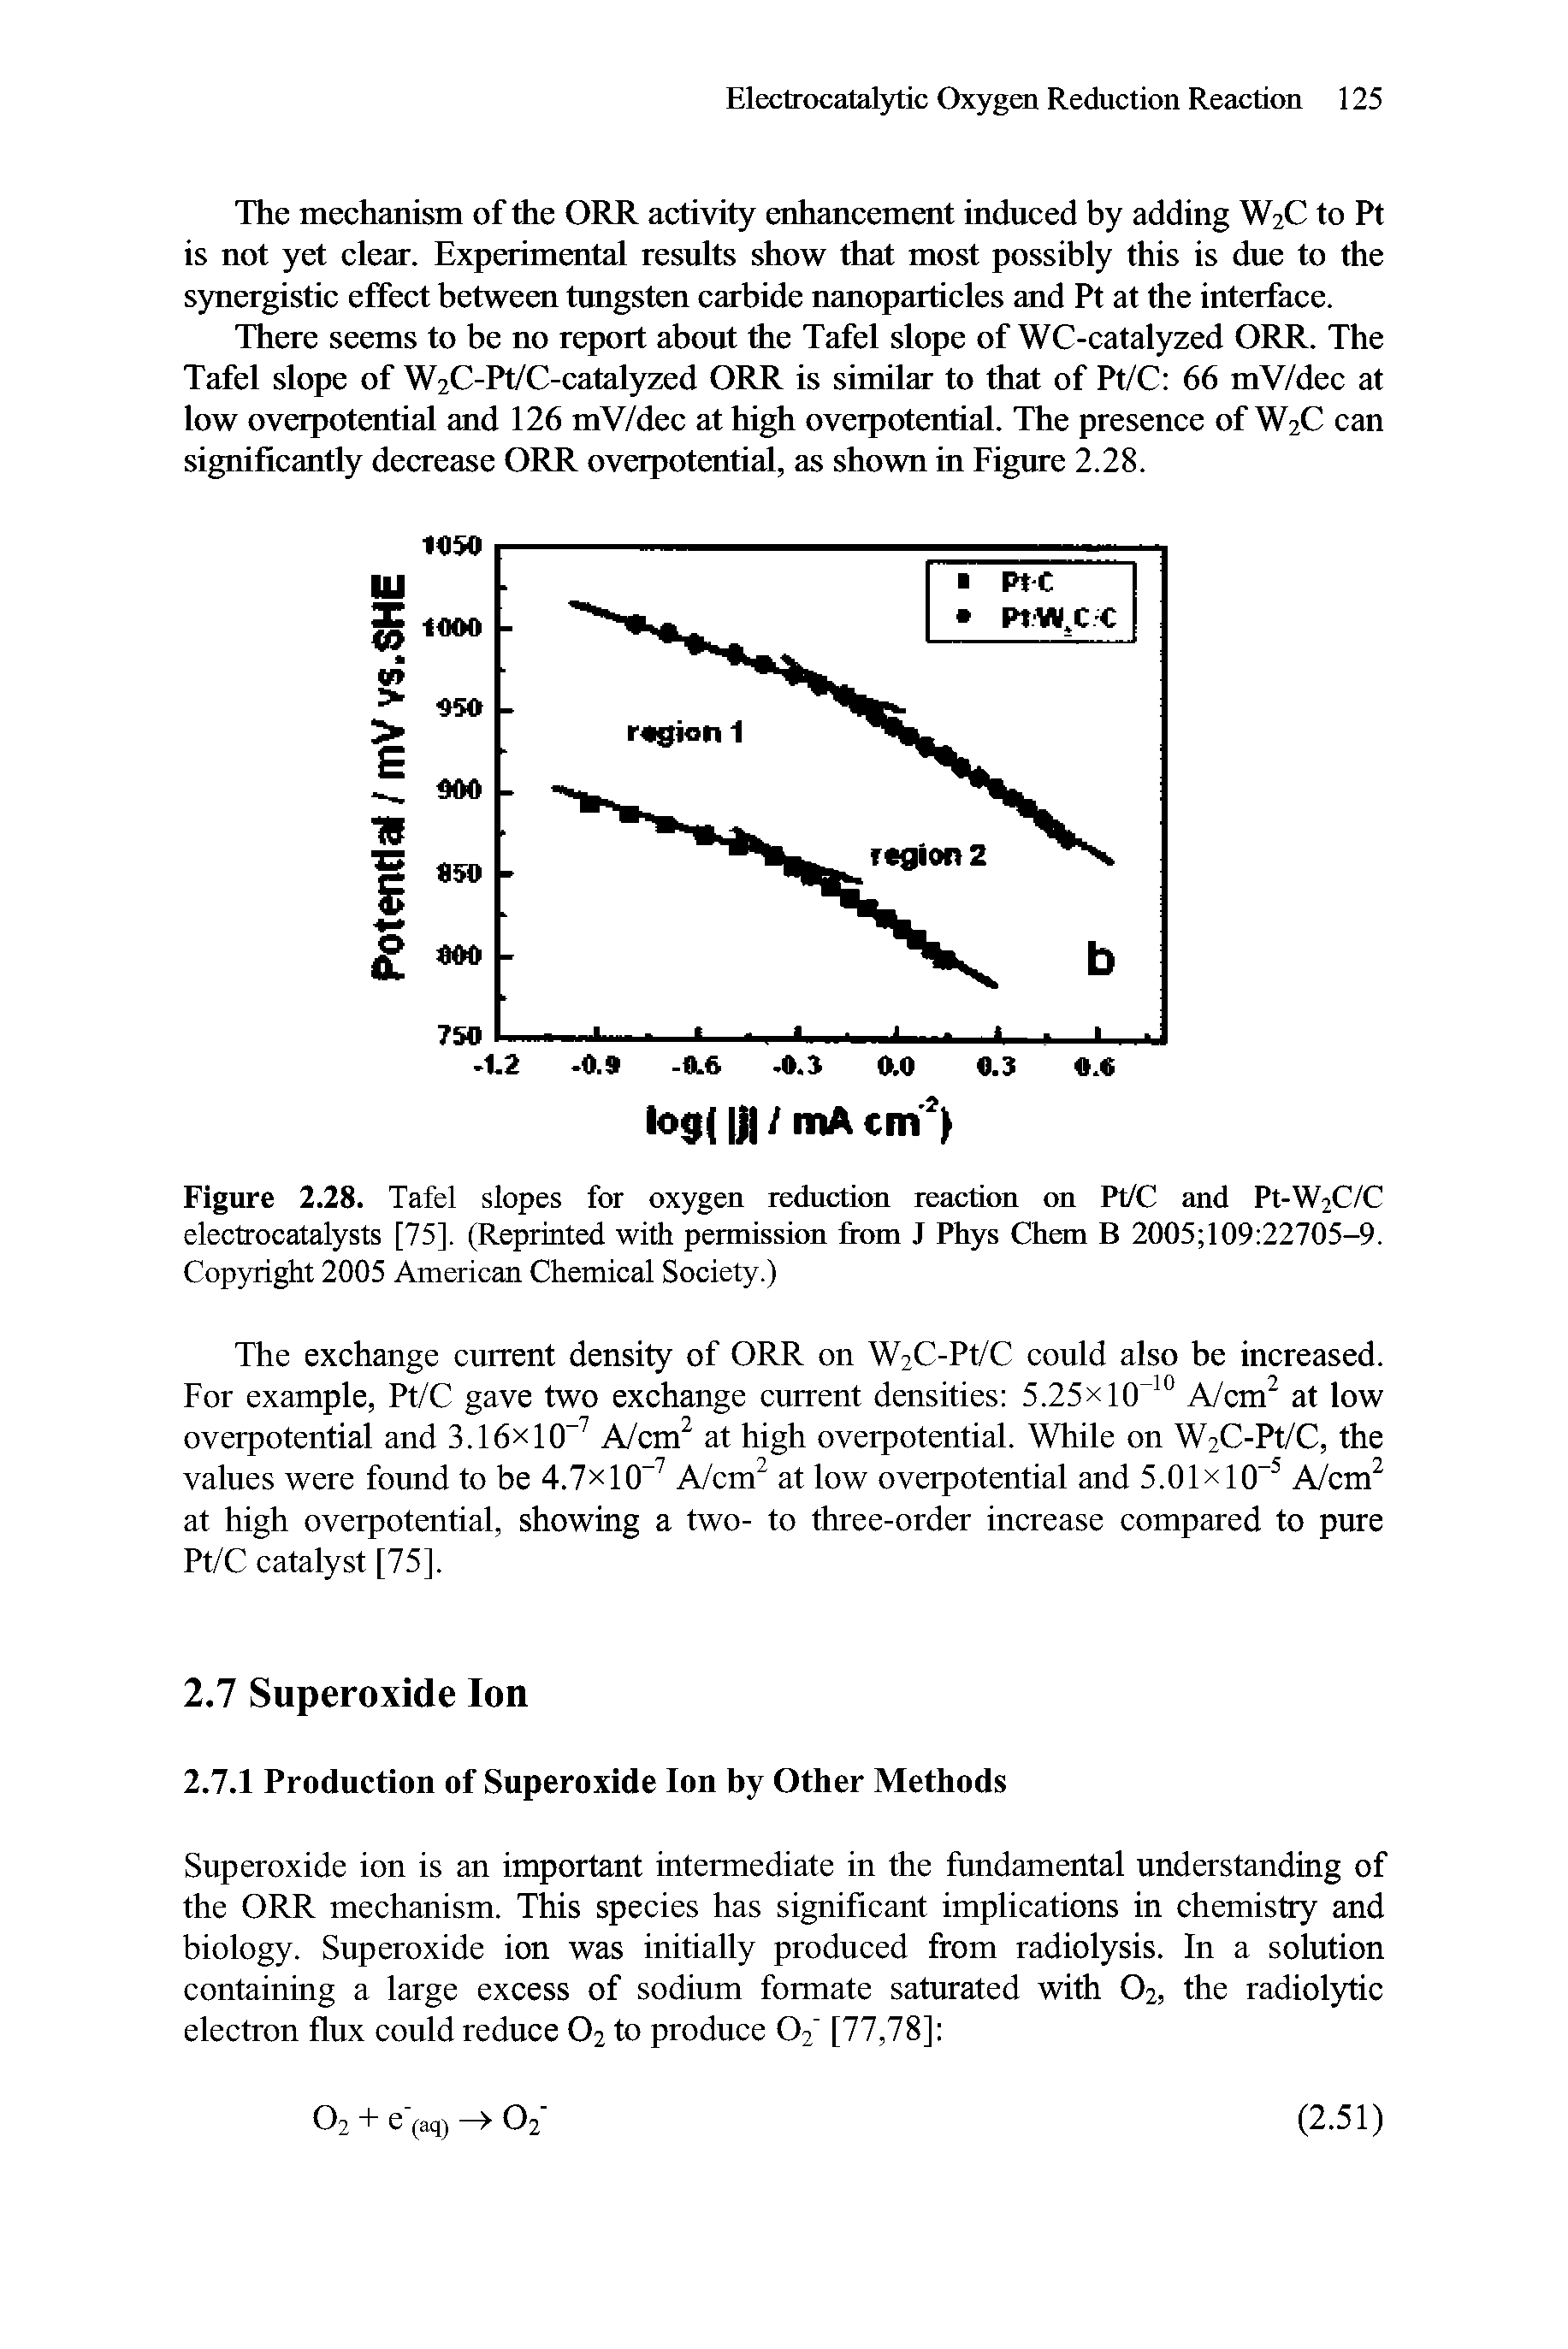 Figure 2.28. Tafel slopes for oxygen reduction reaction on Pt/C and Pt-W2C/C electrocatalysts [75]. (Reprinted with permission from J Phys Chem B 2005 109 22705-9. Copyright 2005 American Chemical Society.)...